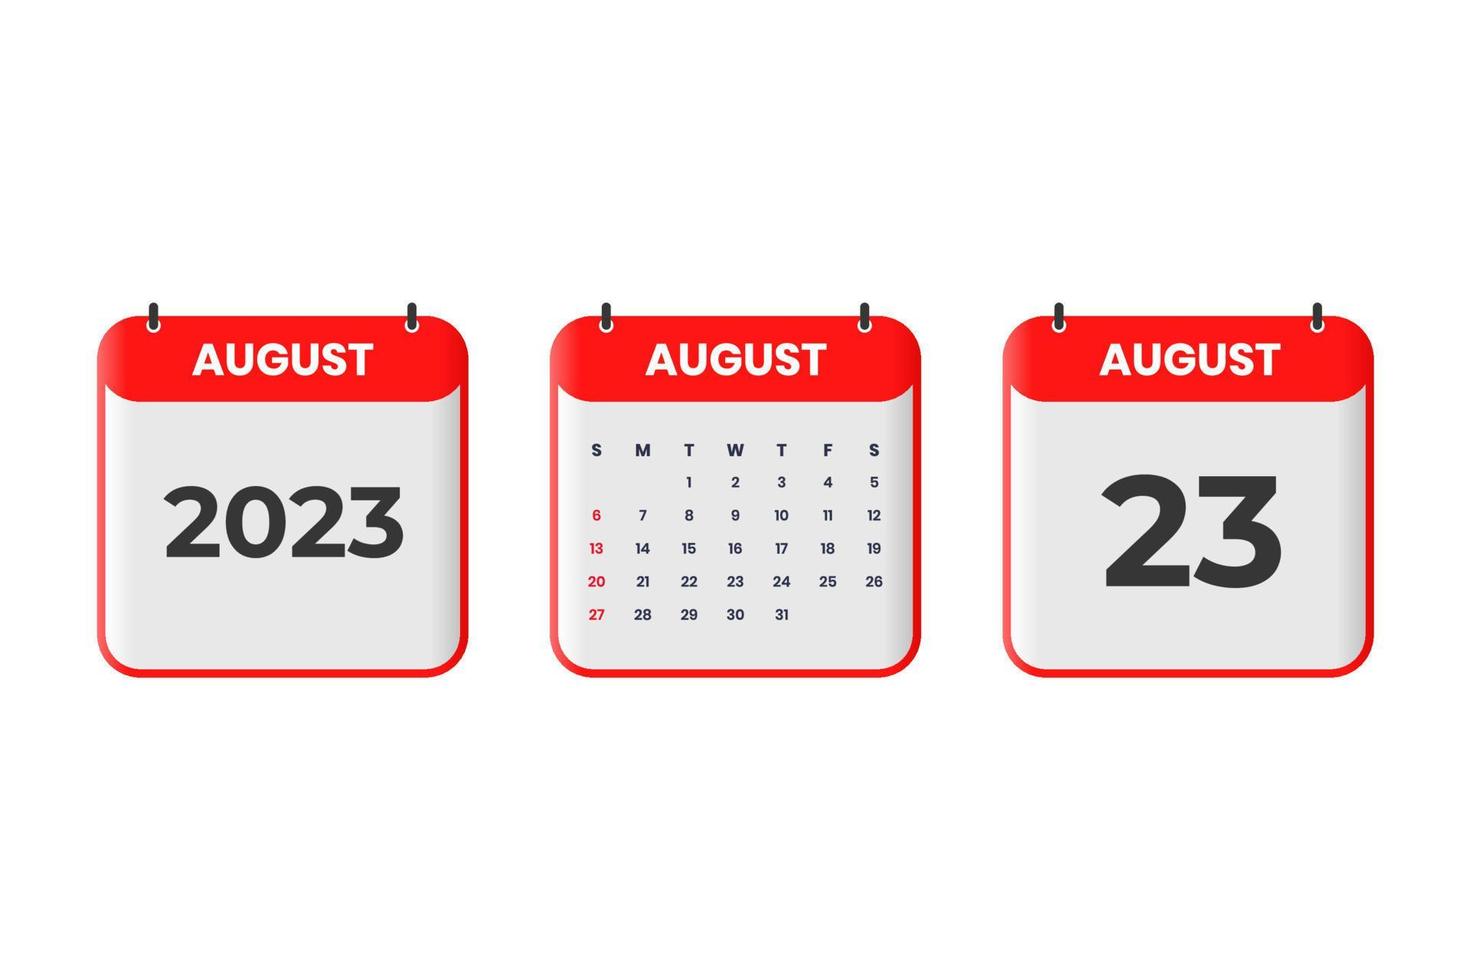 August 2023 calendar design. 23rd August 2023 calendar icon for schedule, appointment, important date concept vector